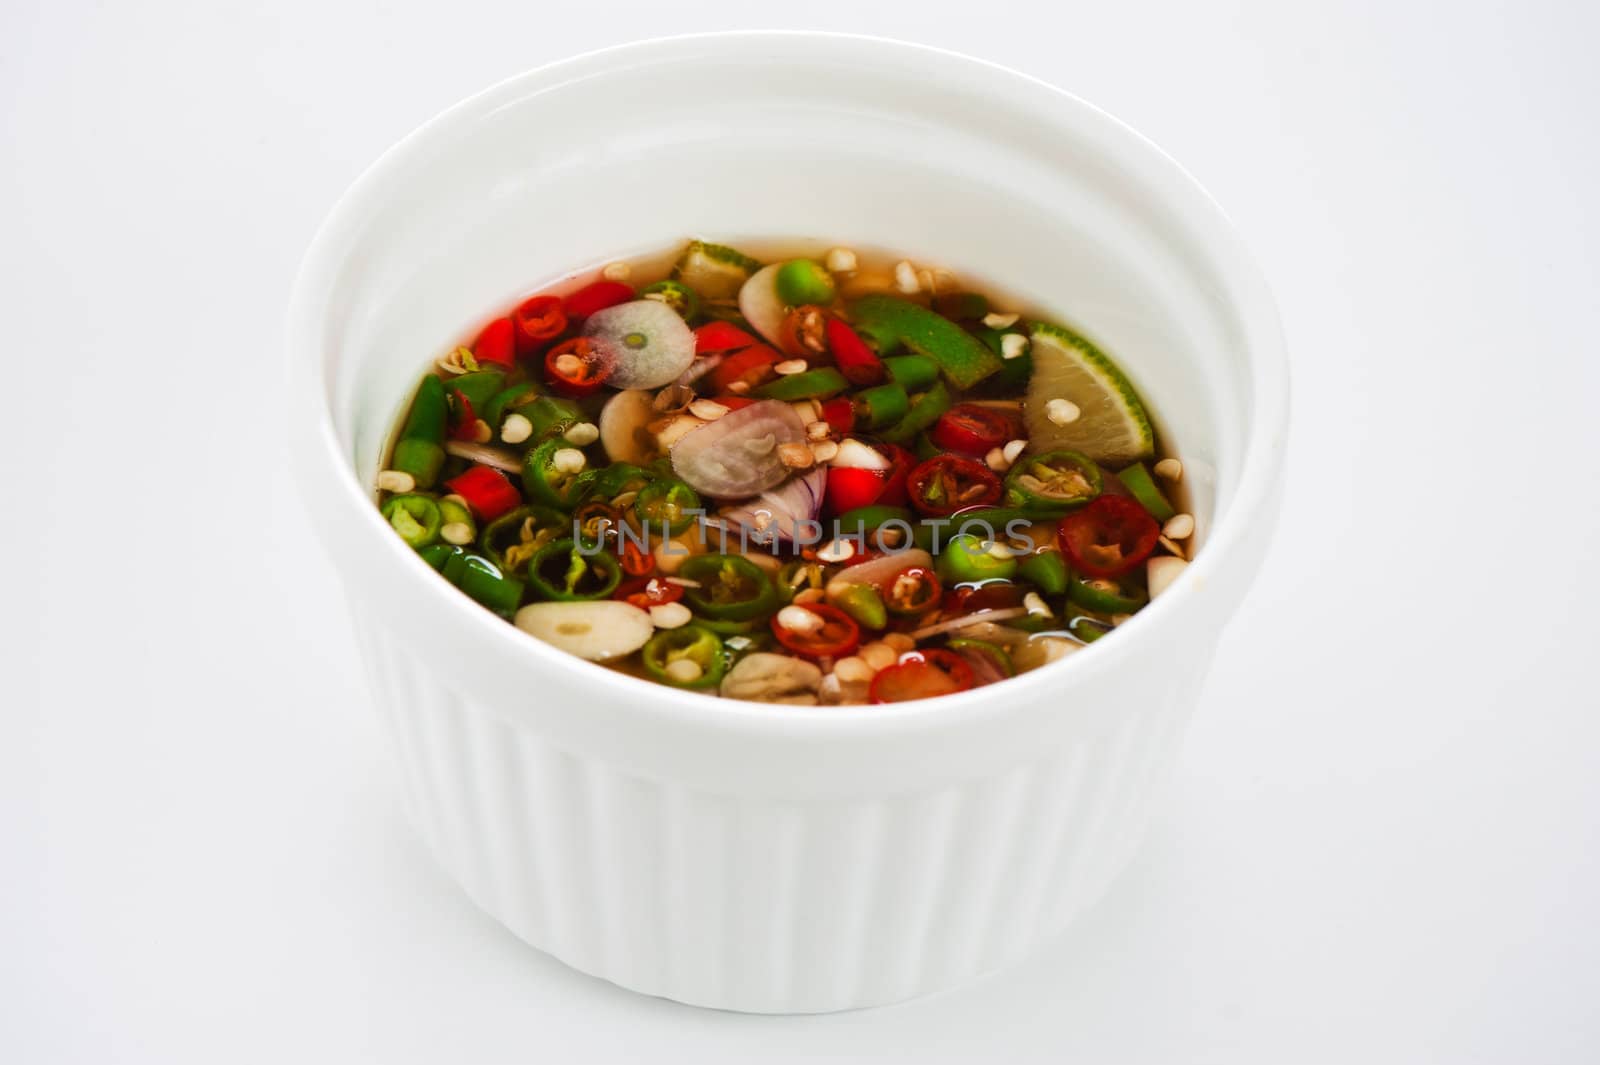 Hot spice chili fish sauce in a ramecin on white background